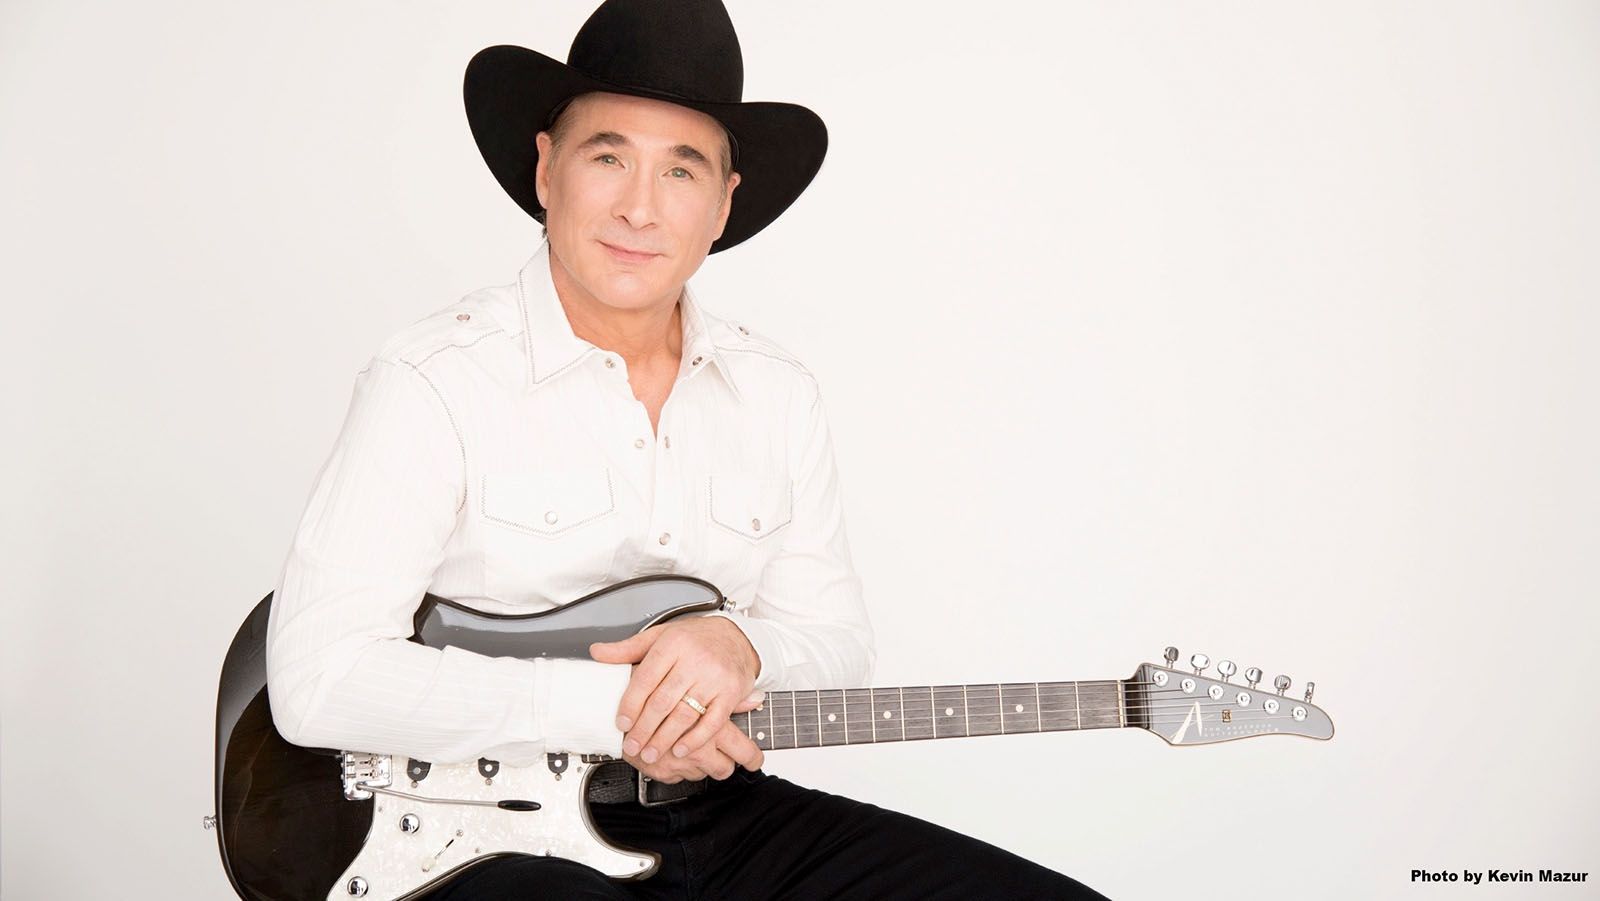 Country star Clint Black will appear at Honeywell Center in Wabash on Saturday, Oct. 28.